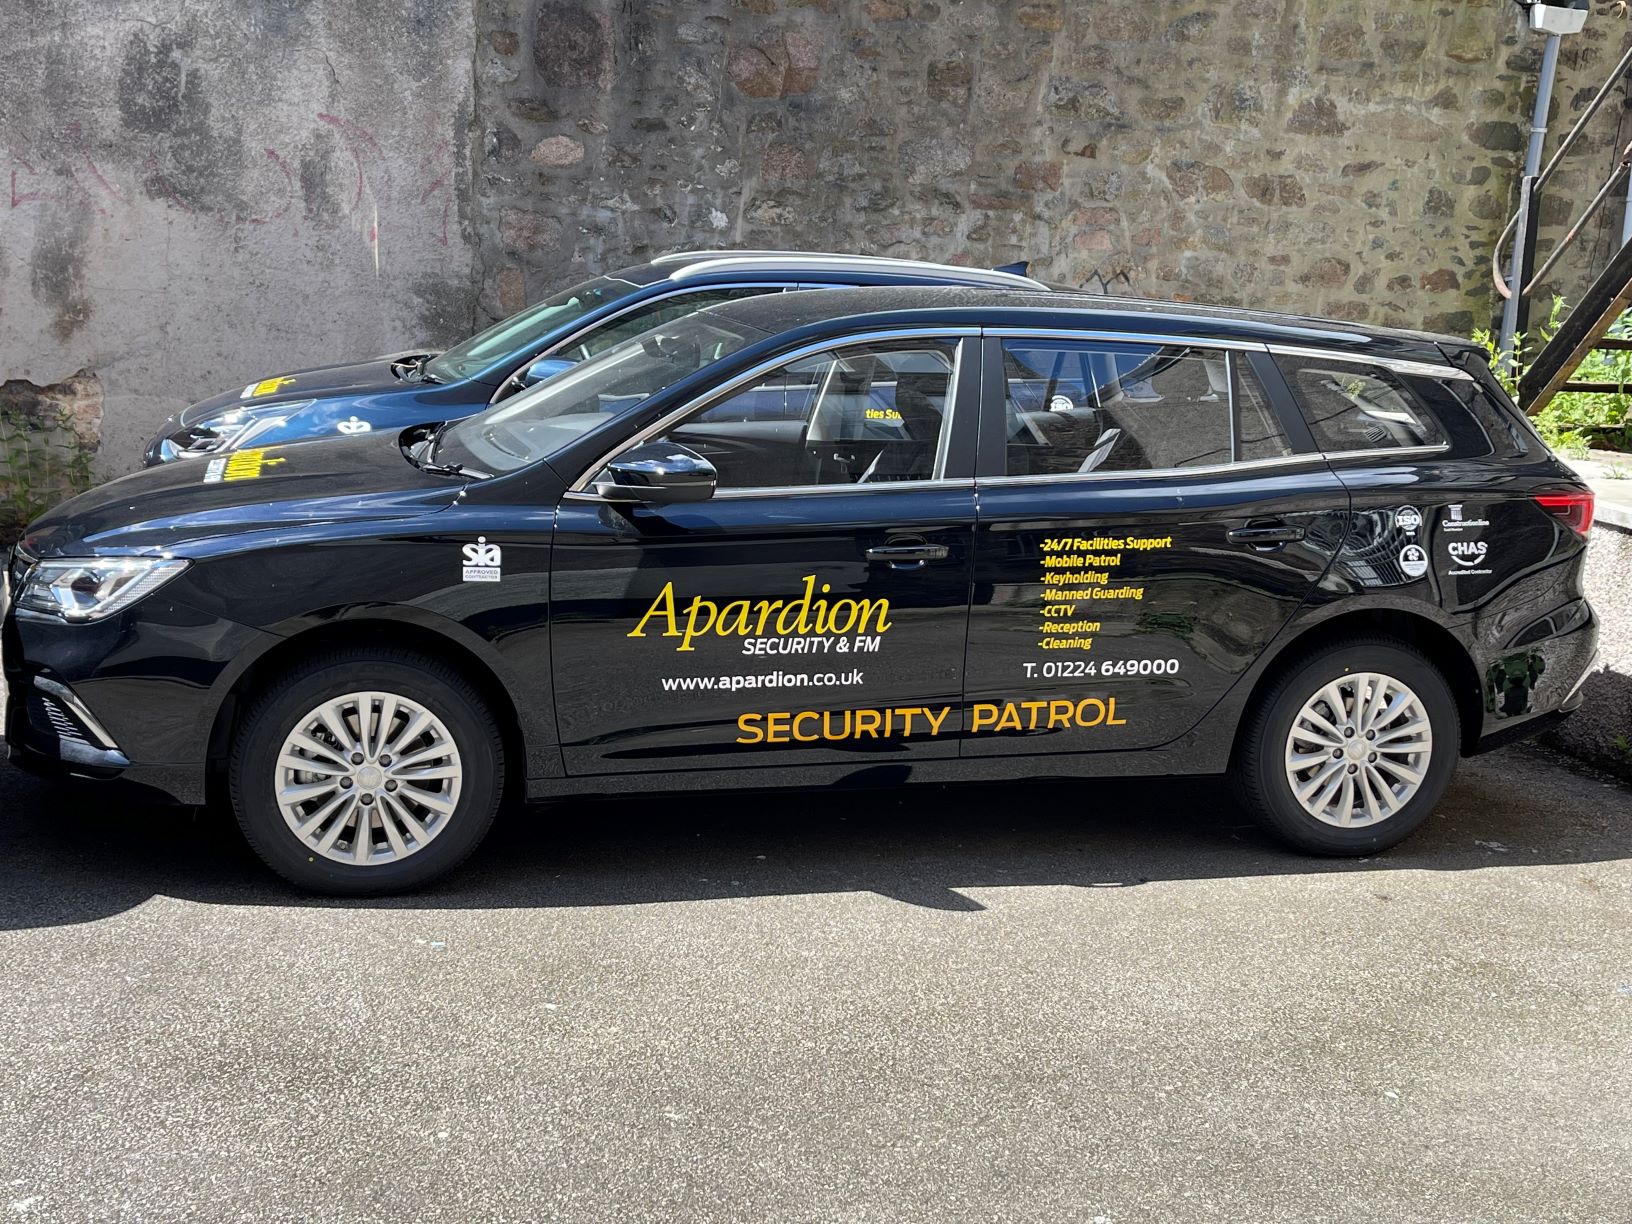 New fully electric car to join Apardion mobile patrol fleet